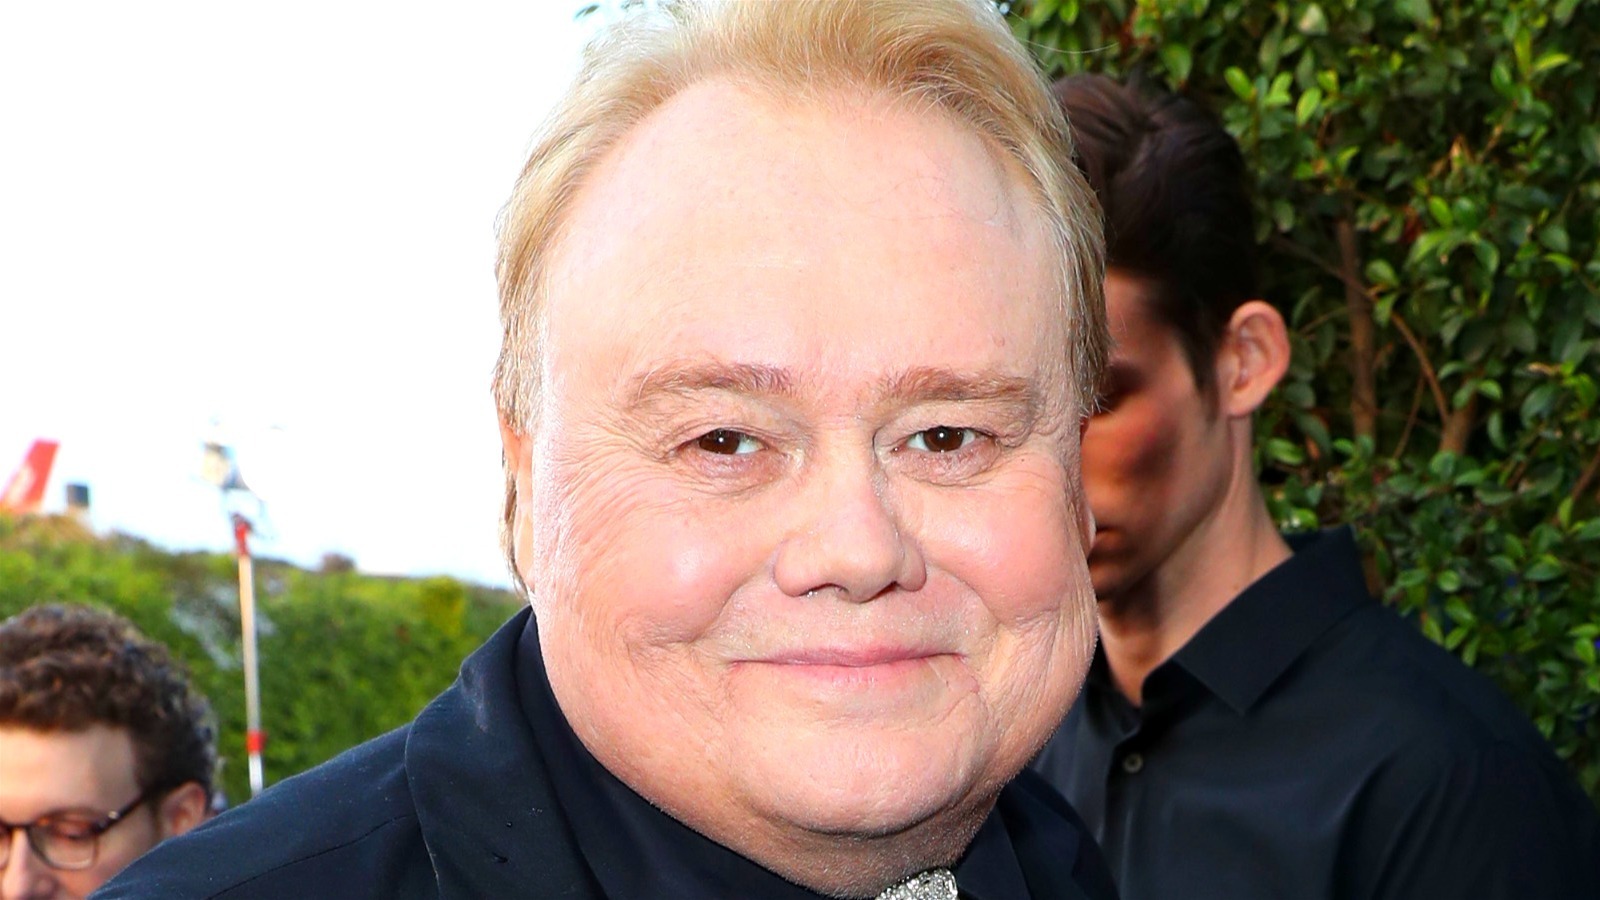 What's funny? Just ask Louie Anderson